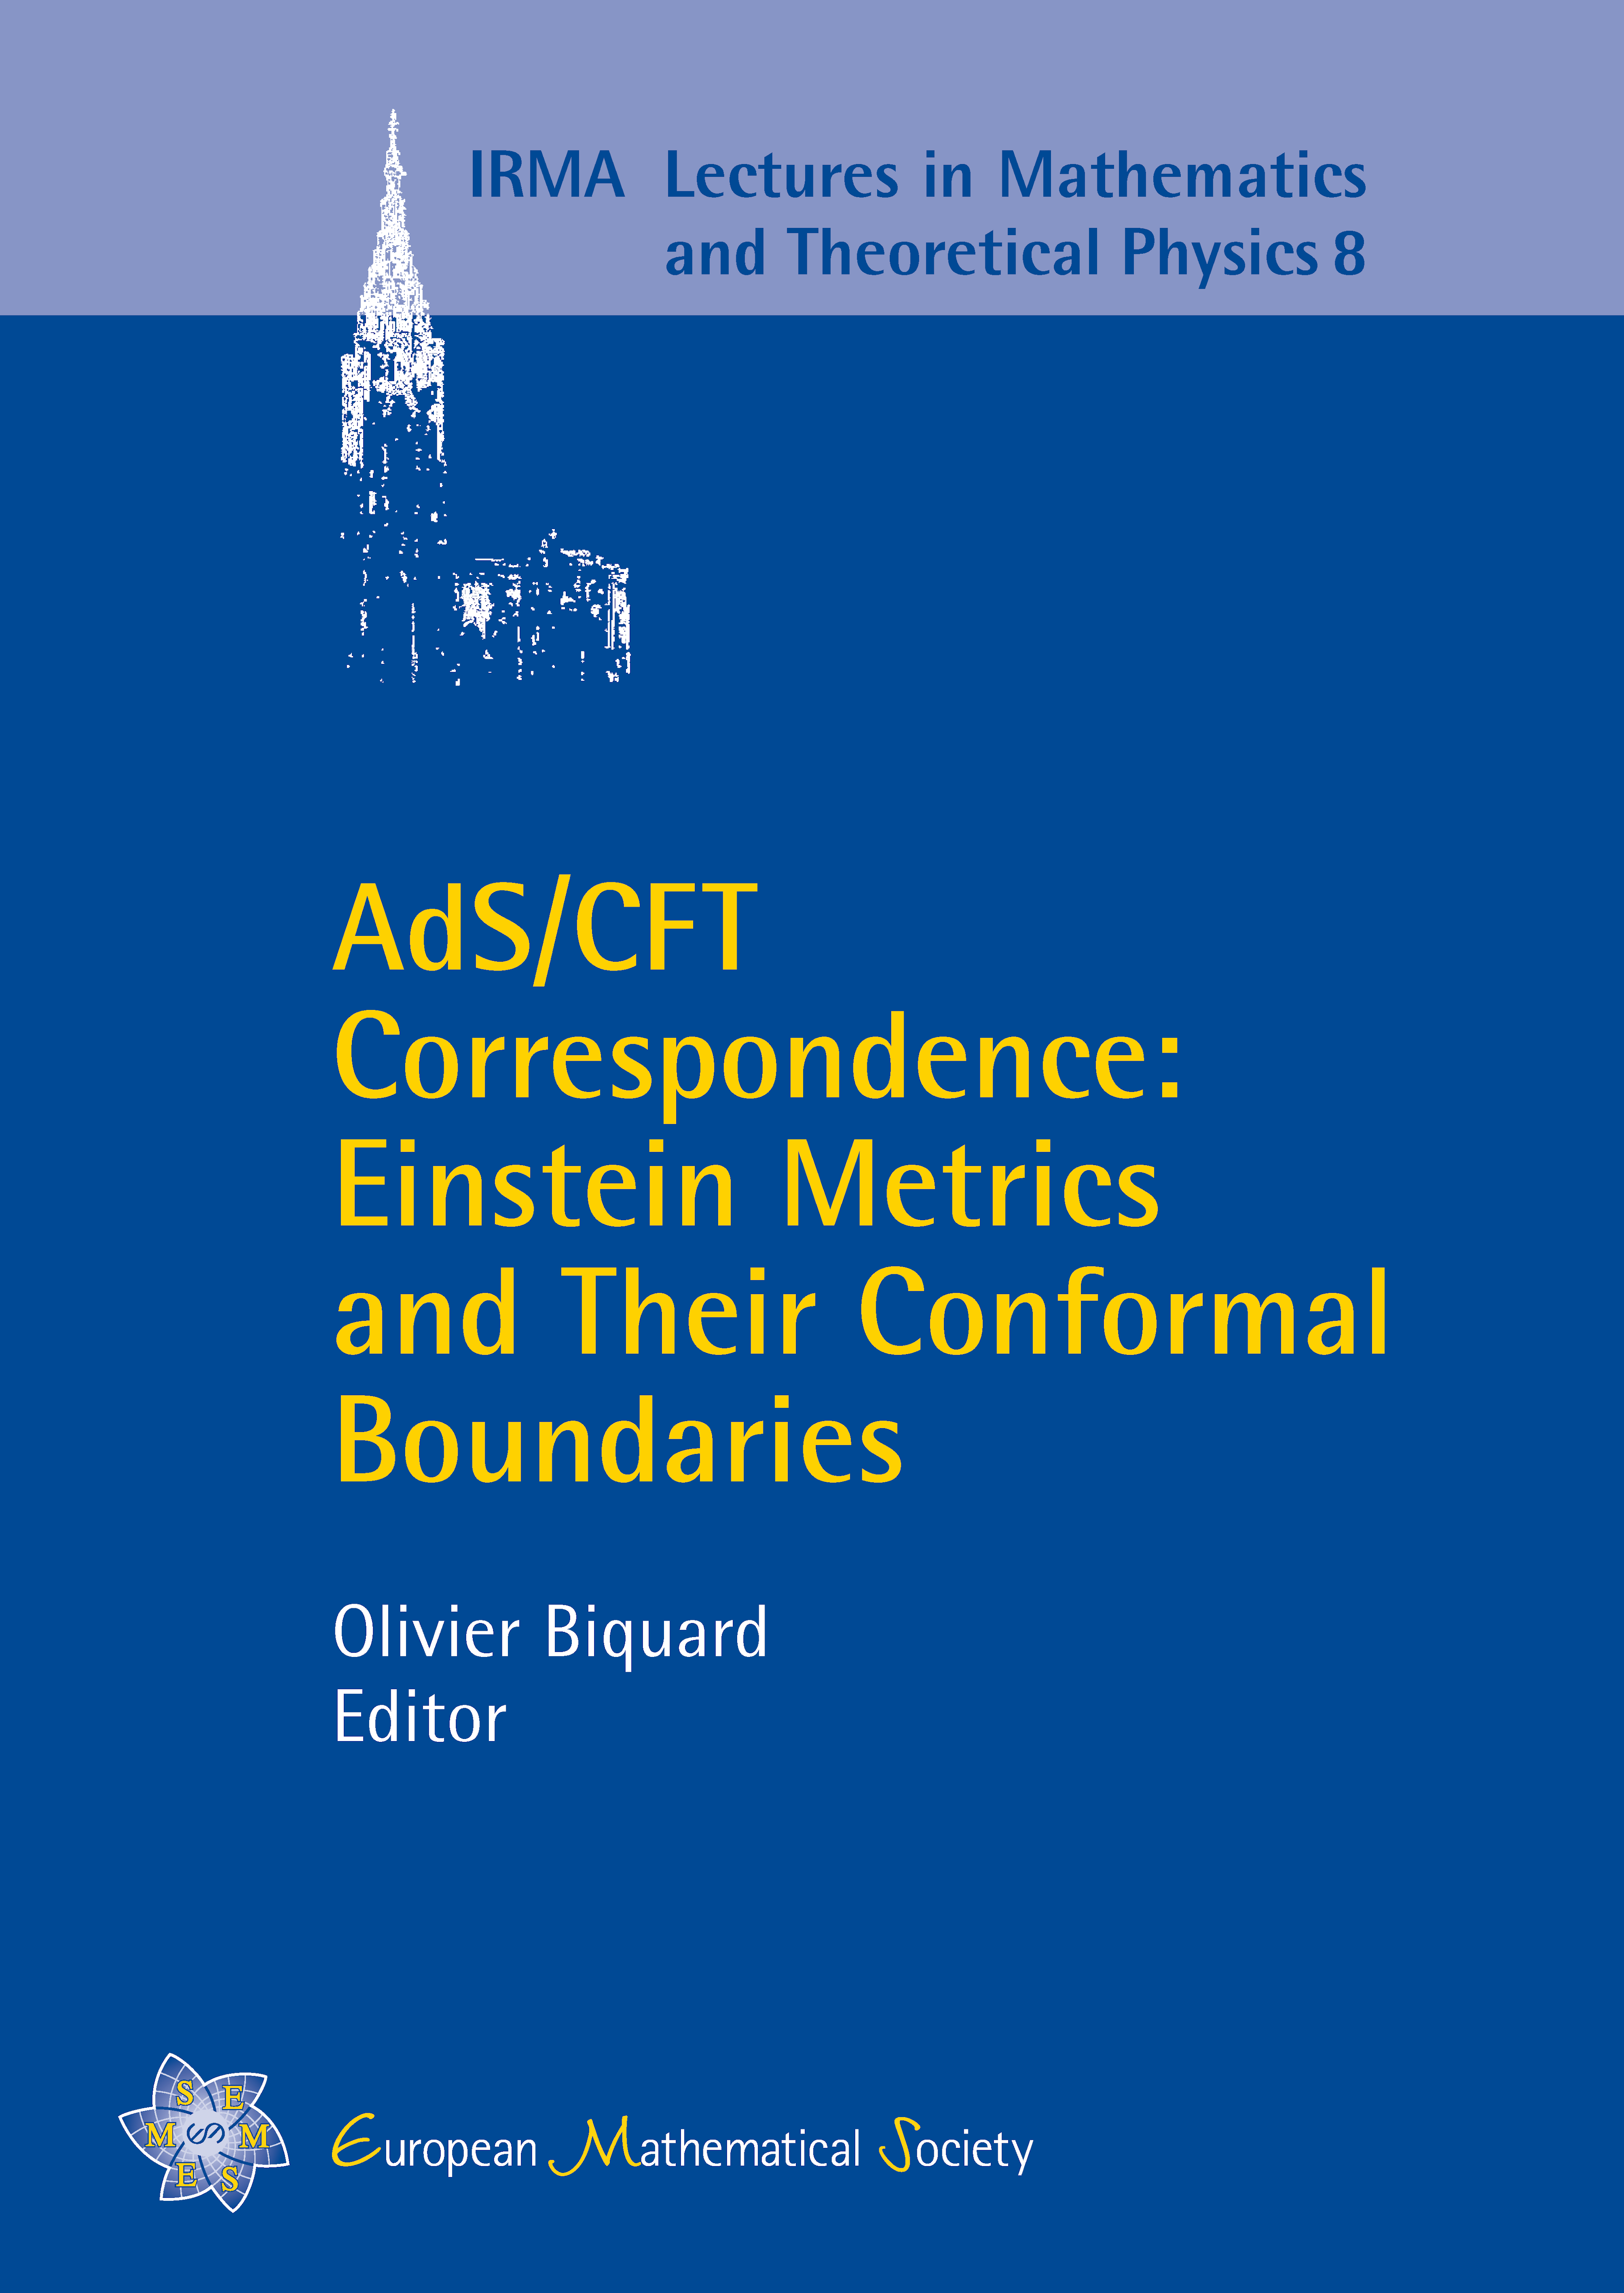 Some aspects of the AdS/CFT correspondence cover